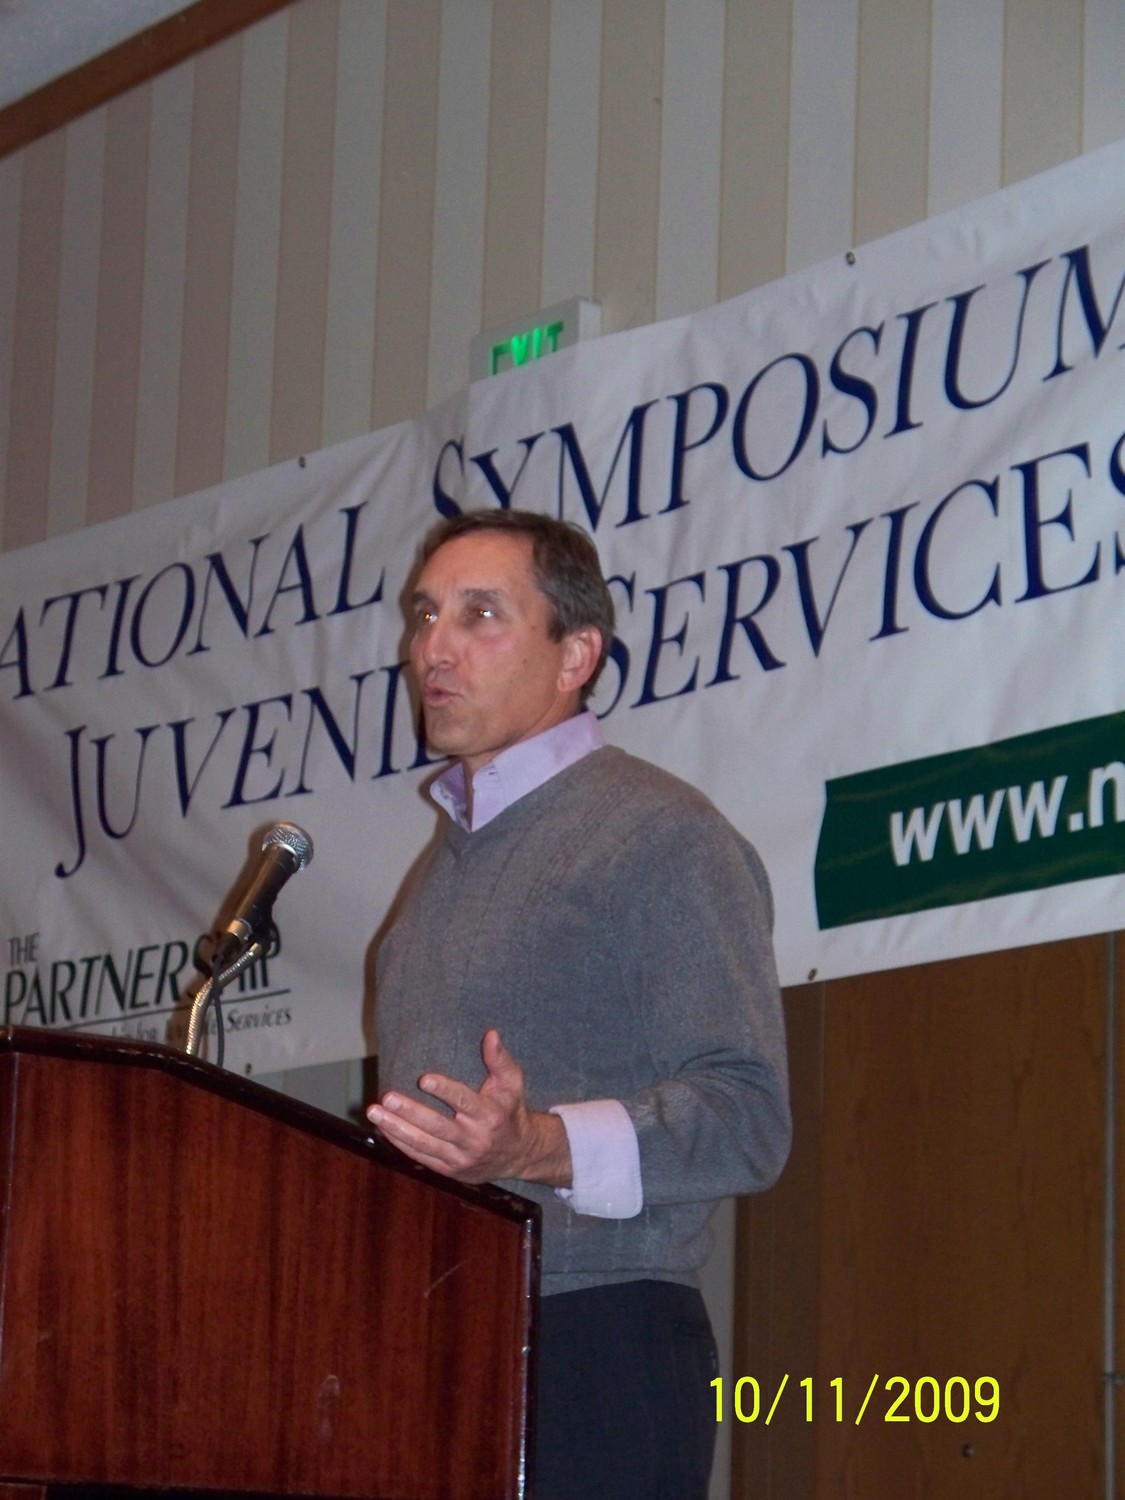 Gallery Photo of Mark is invited to speak at national professional conferences.